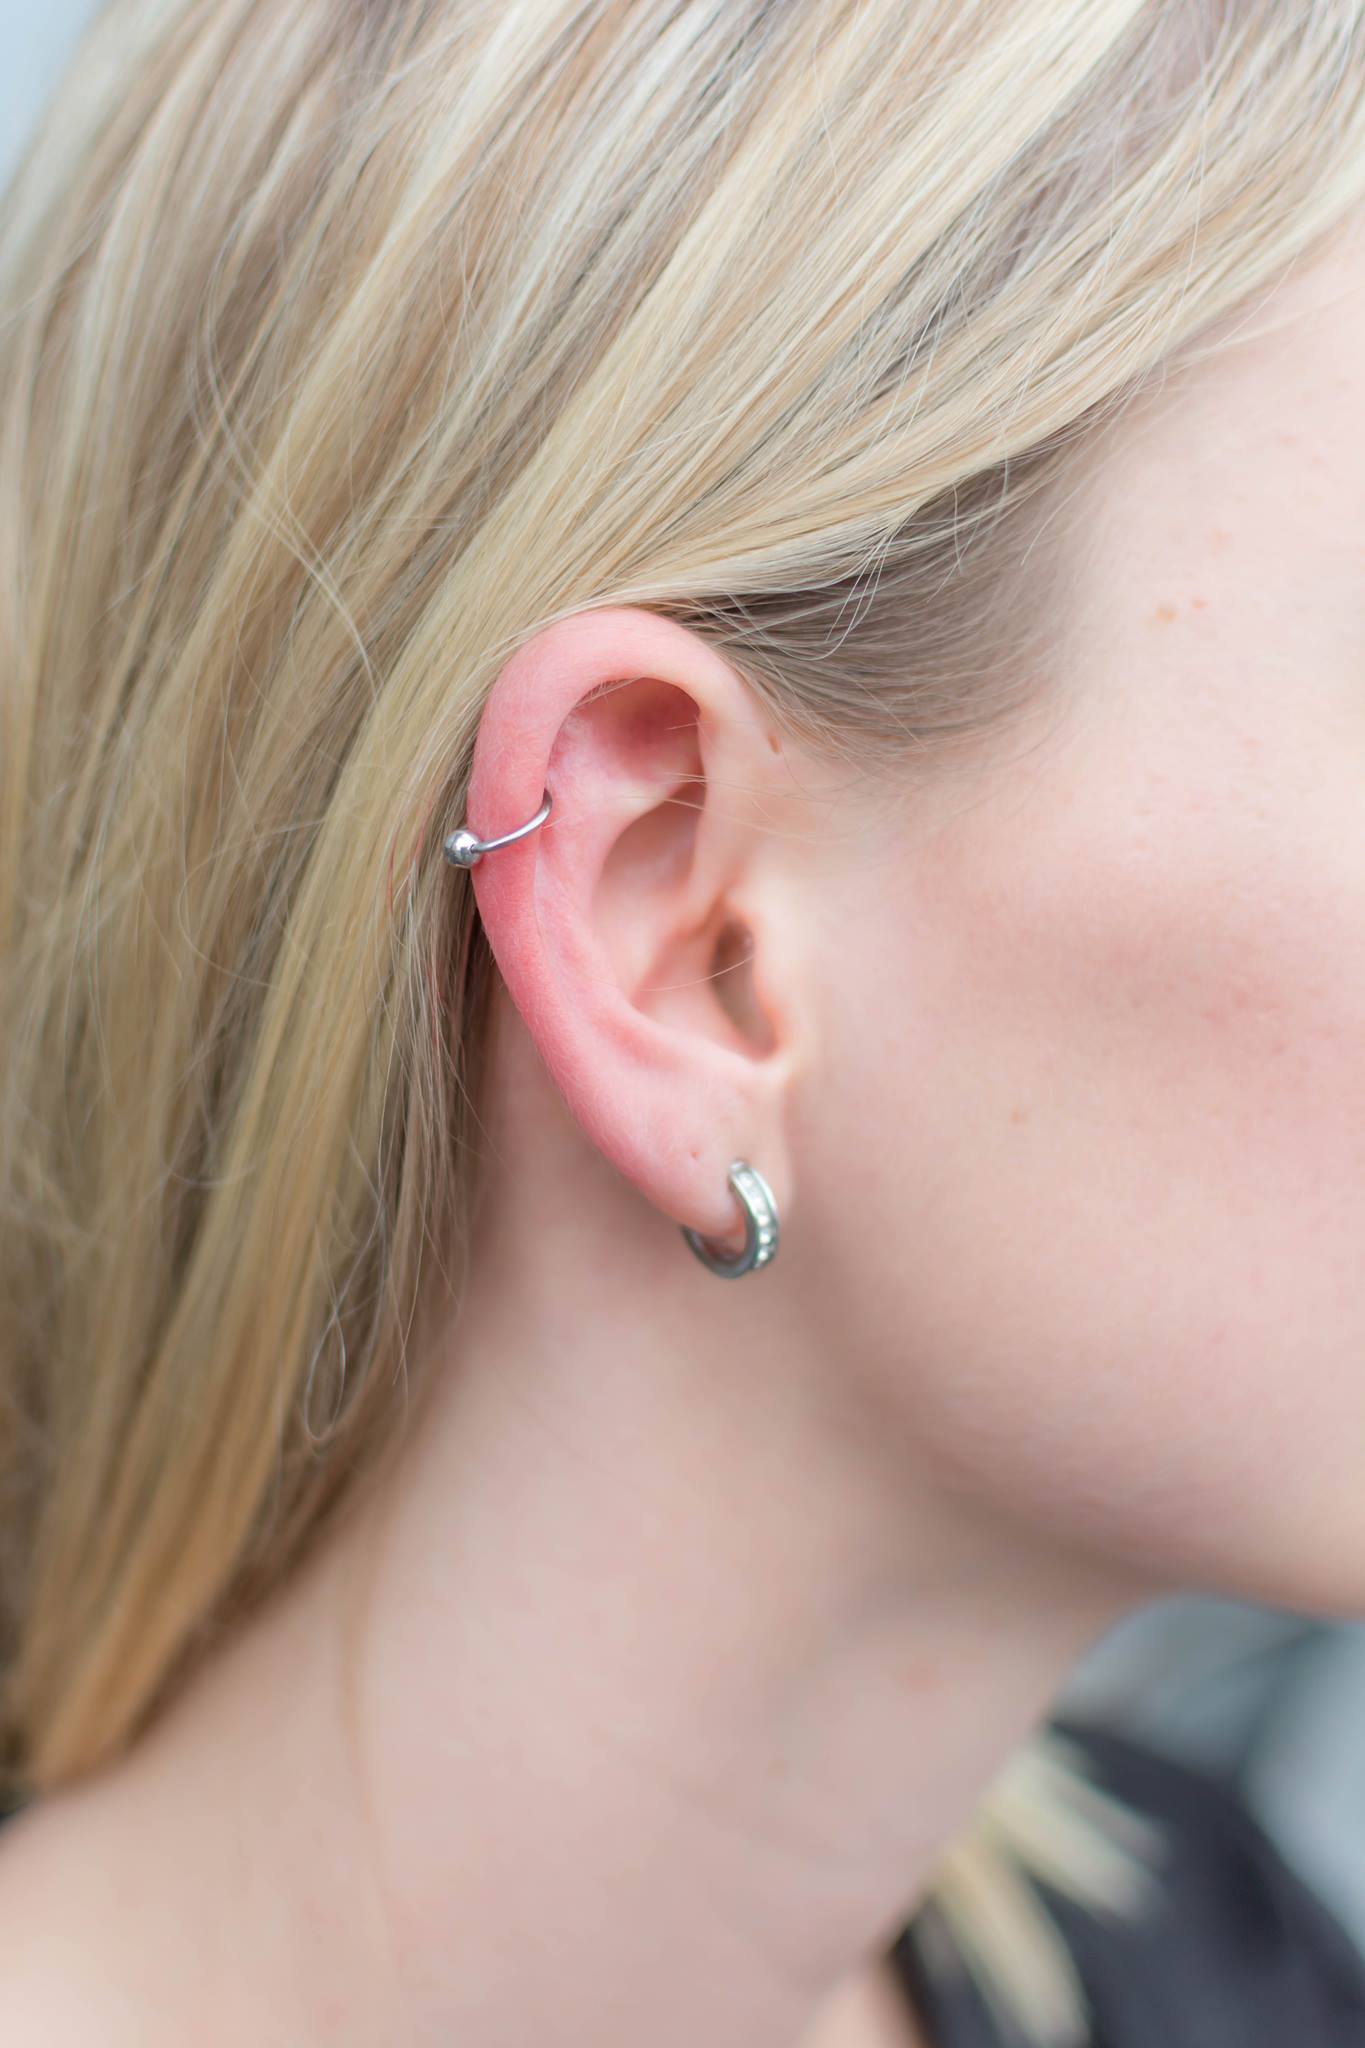 Helix Piercing Dublin | The Ink Factory 